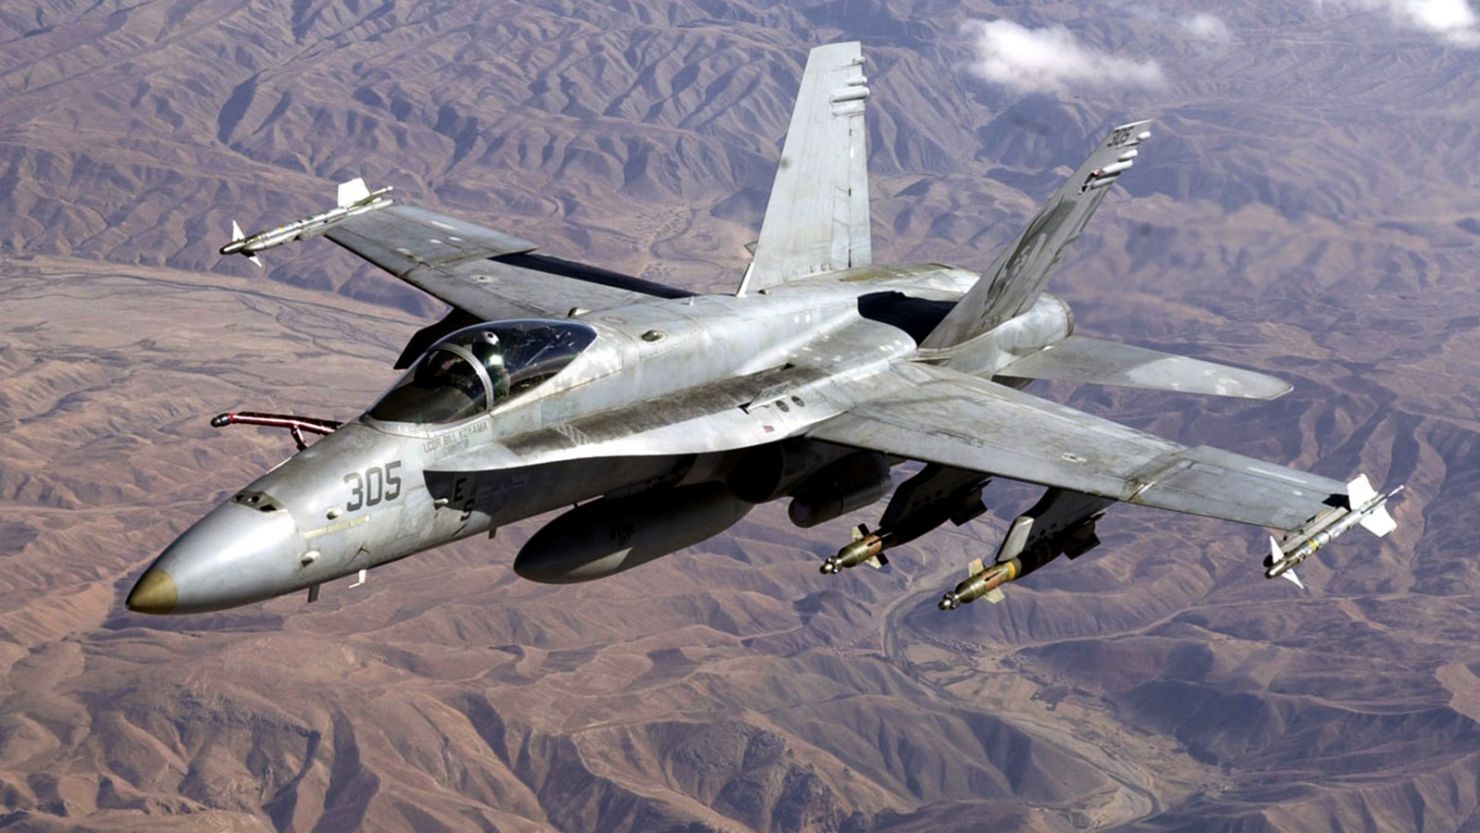 An FA-18 Hornet like this one crashed today in the Southern California desert on November, 9. The pilot ejected safely.   